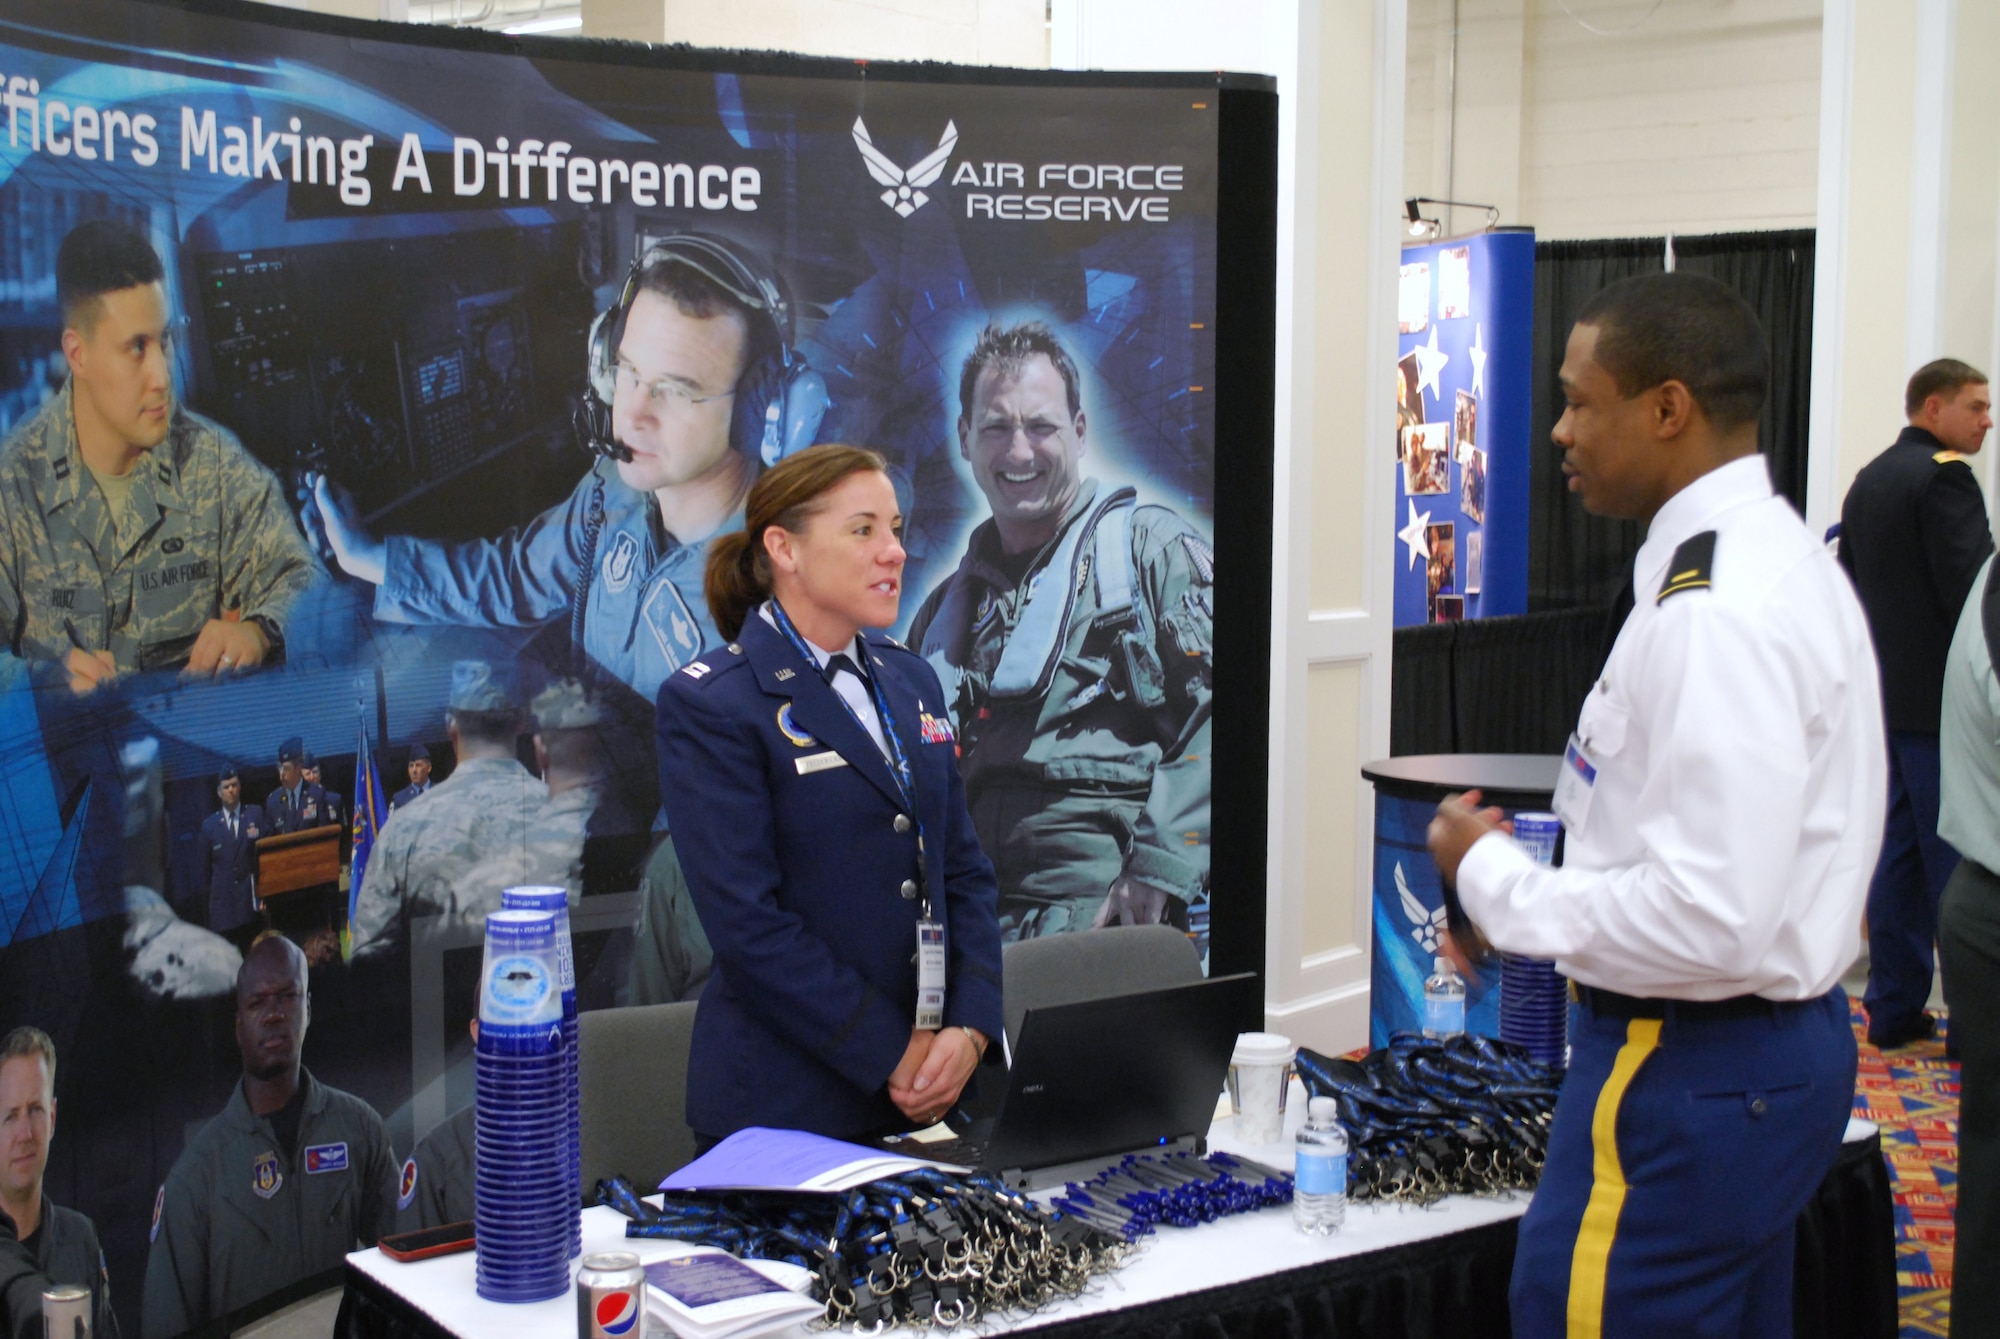 Capt. Holly A. Fredericks greets another potential recruit for the Air Force Reserve during the Reserve Component Expo at the Marriott Wardman Park Hotel, Washington, D.C., Jan. 31, 2011.  Captain Fredericks is the officer in charge of Recruiting Systems Certification at Headquarters Air Force Reserve Command Recruiting Service, Robins AFB, Ga.  The expo was part of the ROA National Security Symposium and National Convention which drew more than 600 attendees from all military branches, senior DoD leaders as well as cadets just beginning their military training. (U.S. Air Force photo/Col. Bob Thompson)